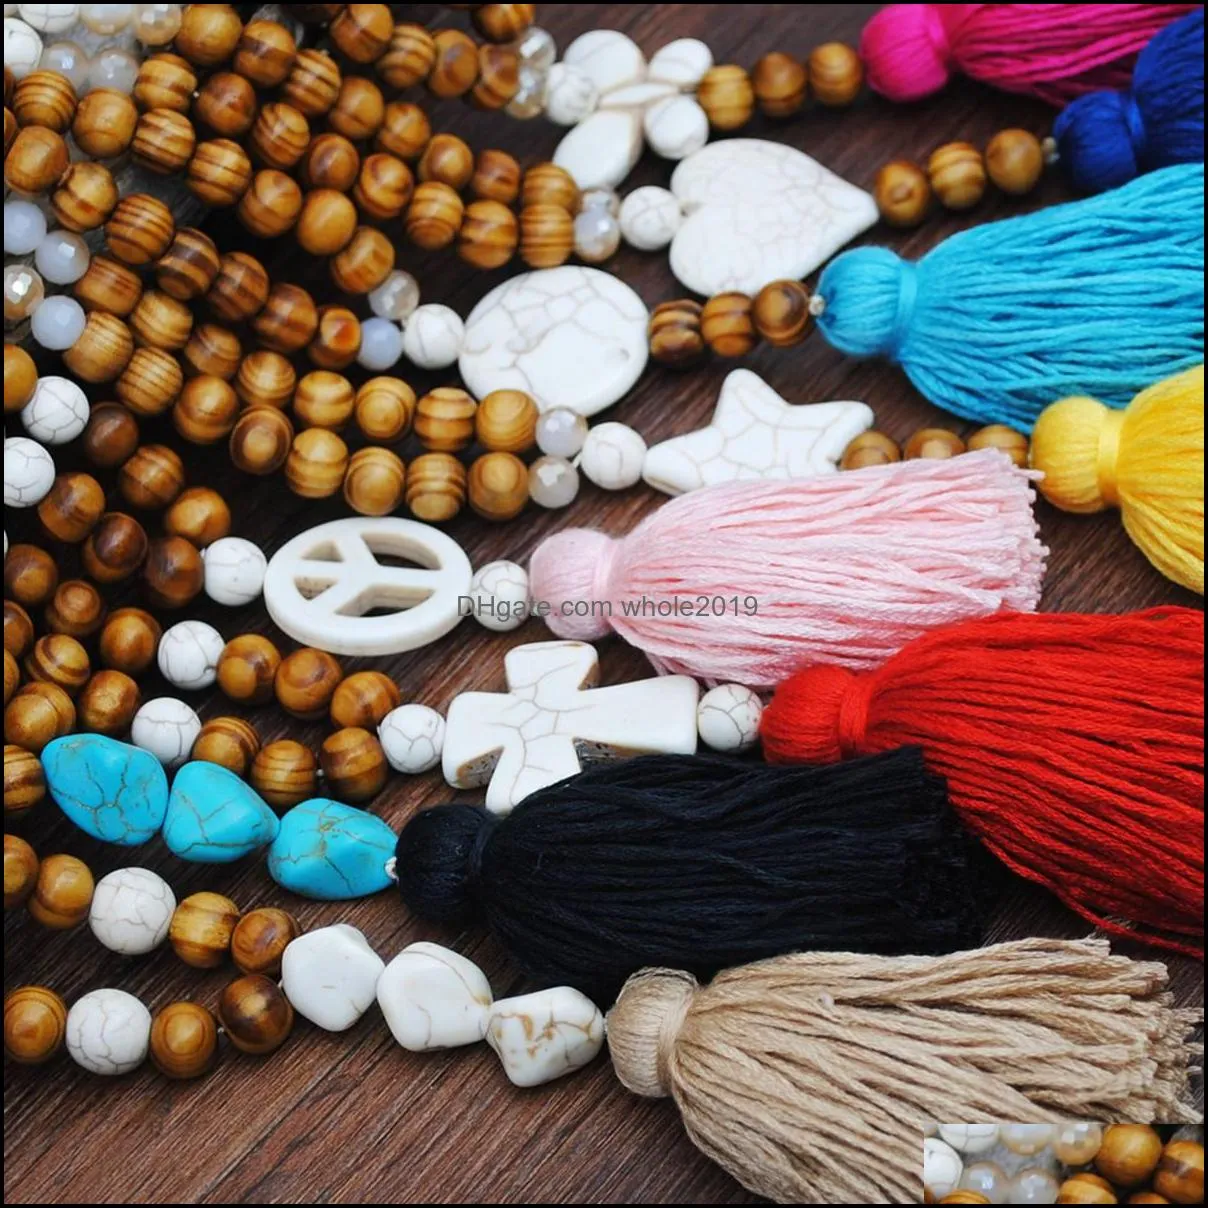 long statement tassel pendant necklace handmade knotted wood beads buddha jewelry for women girl wooden stone necklaces